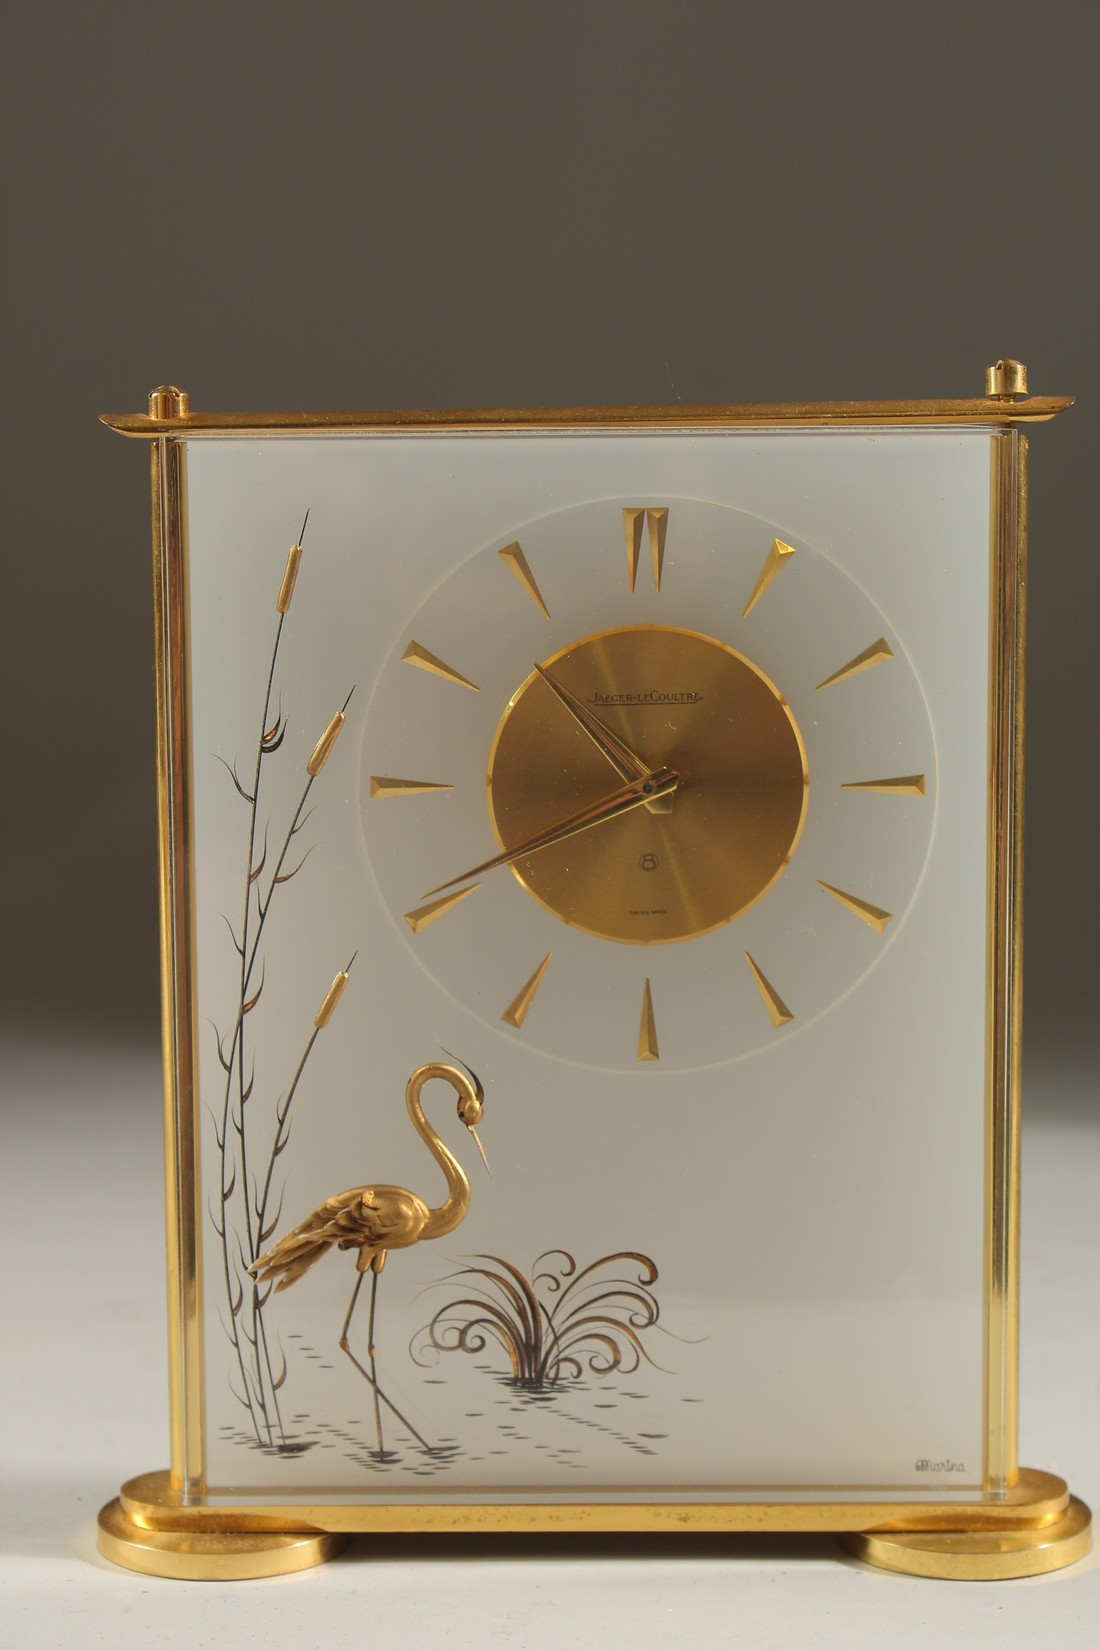 A VERY GOOD JAEGER LECOULTRE CLOCK with a stork and bullrushes. No. 467. 8cms high x 6ins wide